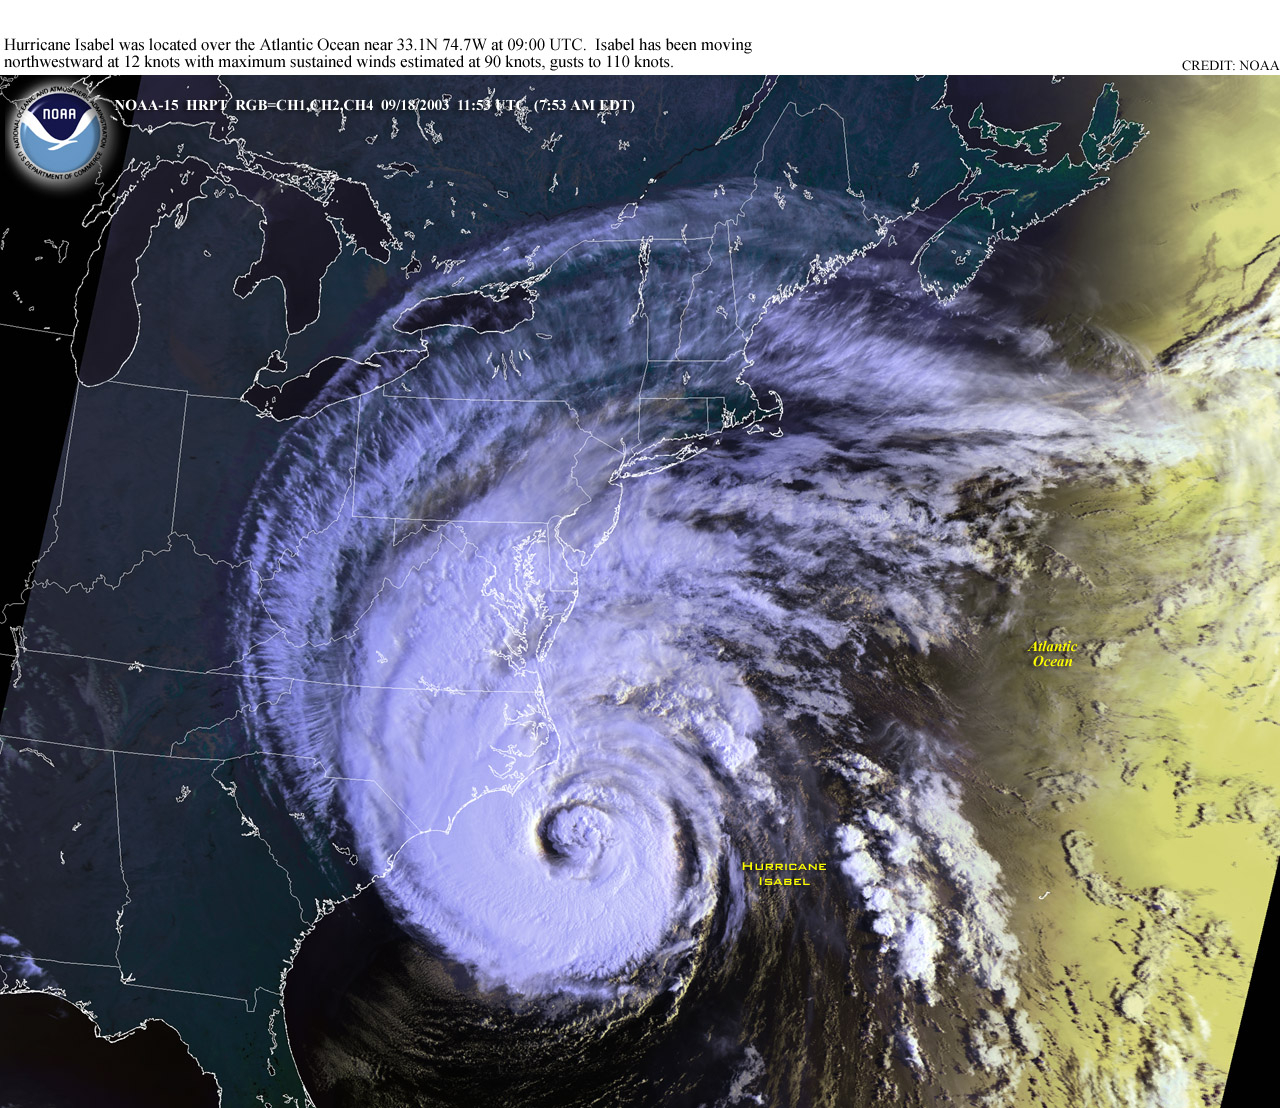 Hurricane Isabel approaching the North Carolina Outer Banks as observed fromthe NOAA-15 Satellite